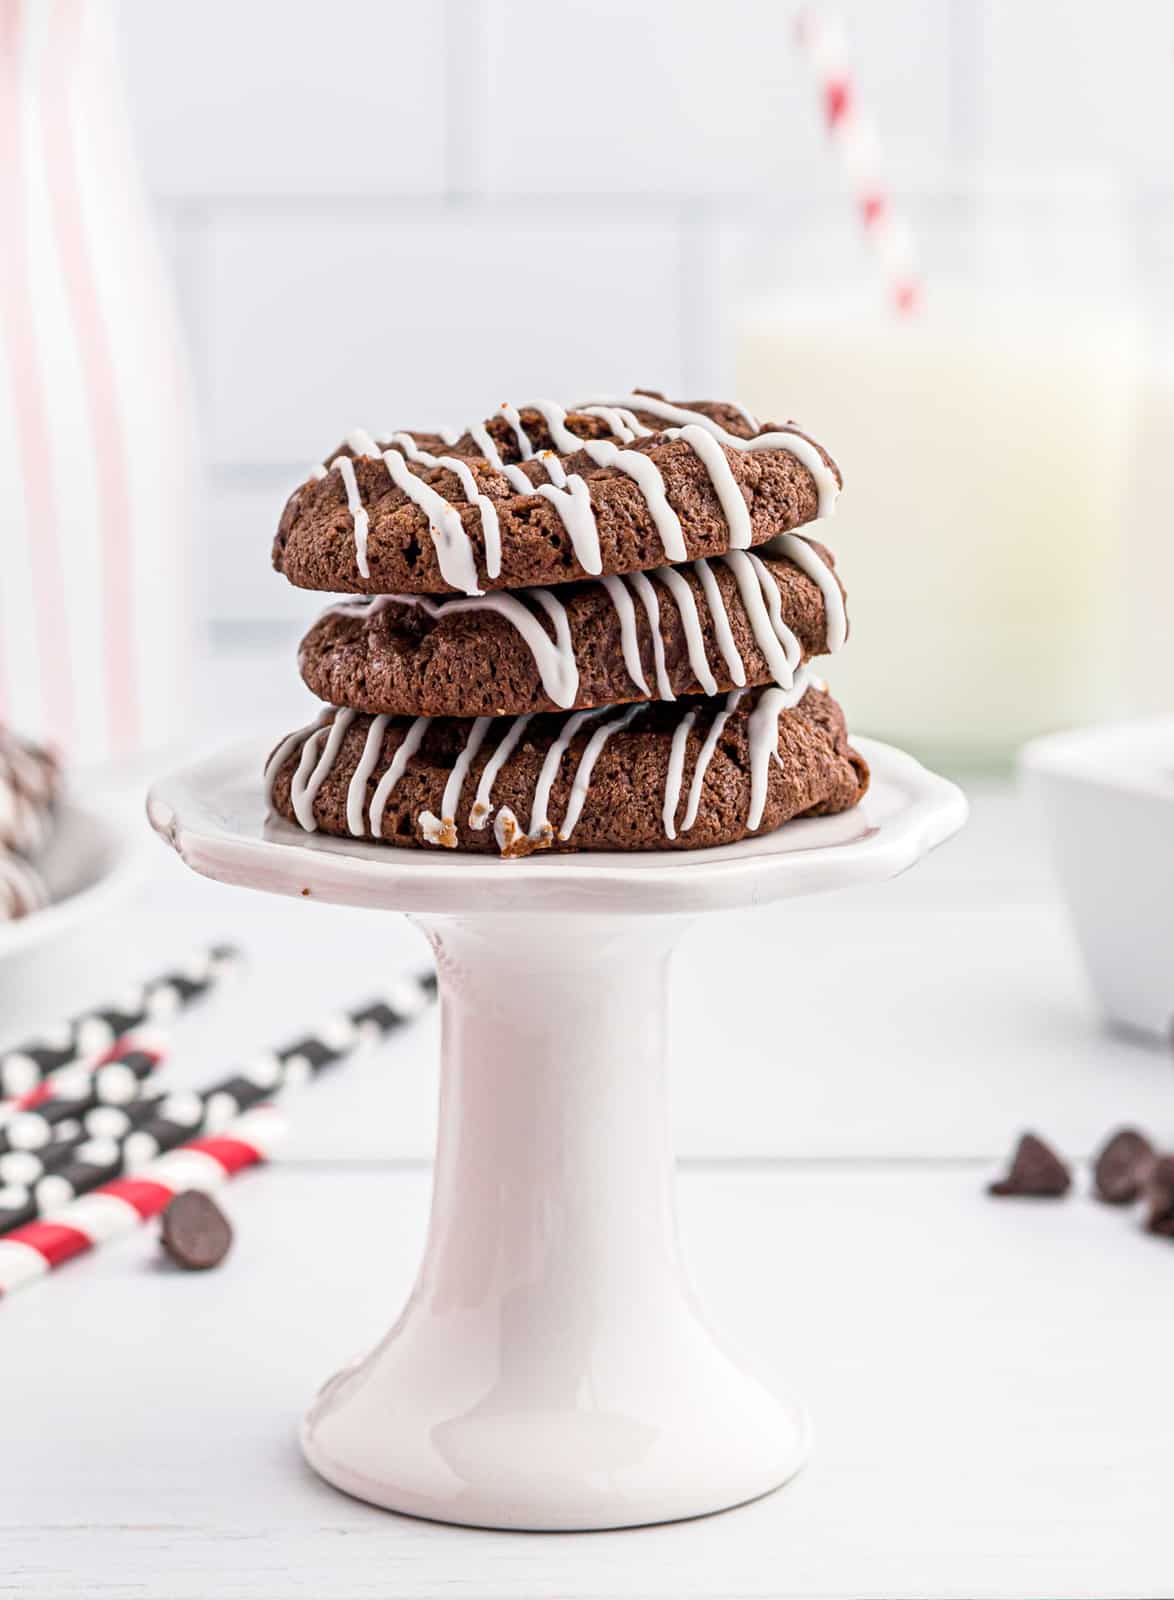 Three Chocolate Chocolate Chip Cookies stacked on pedestal 